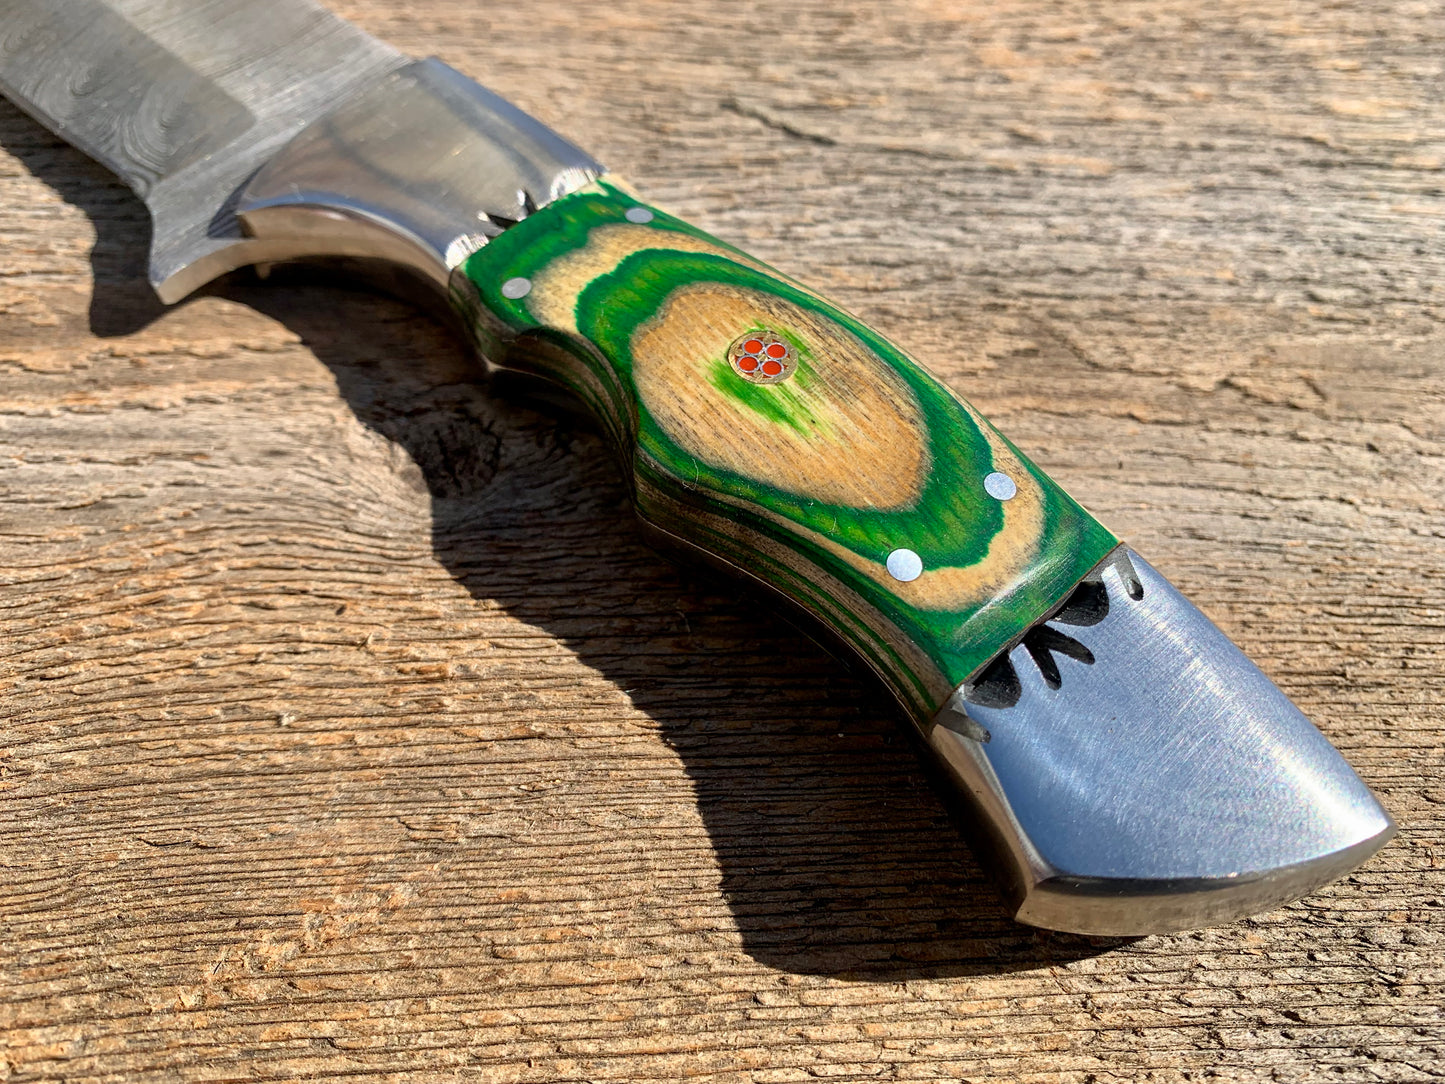 Stainless Handle Damascus Steel Hunting Knife